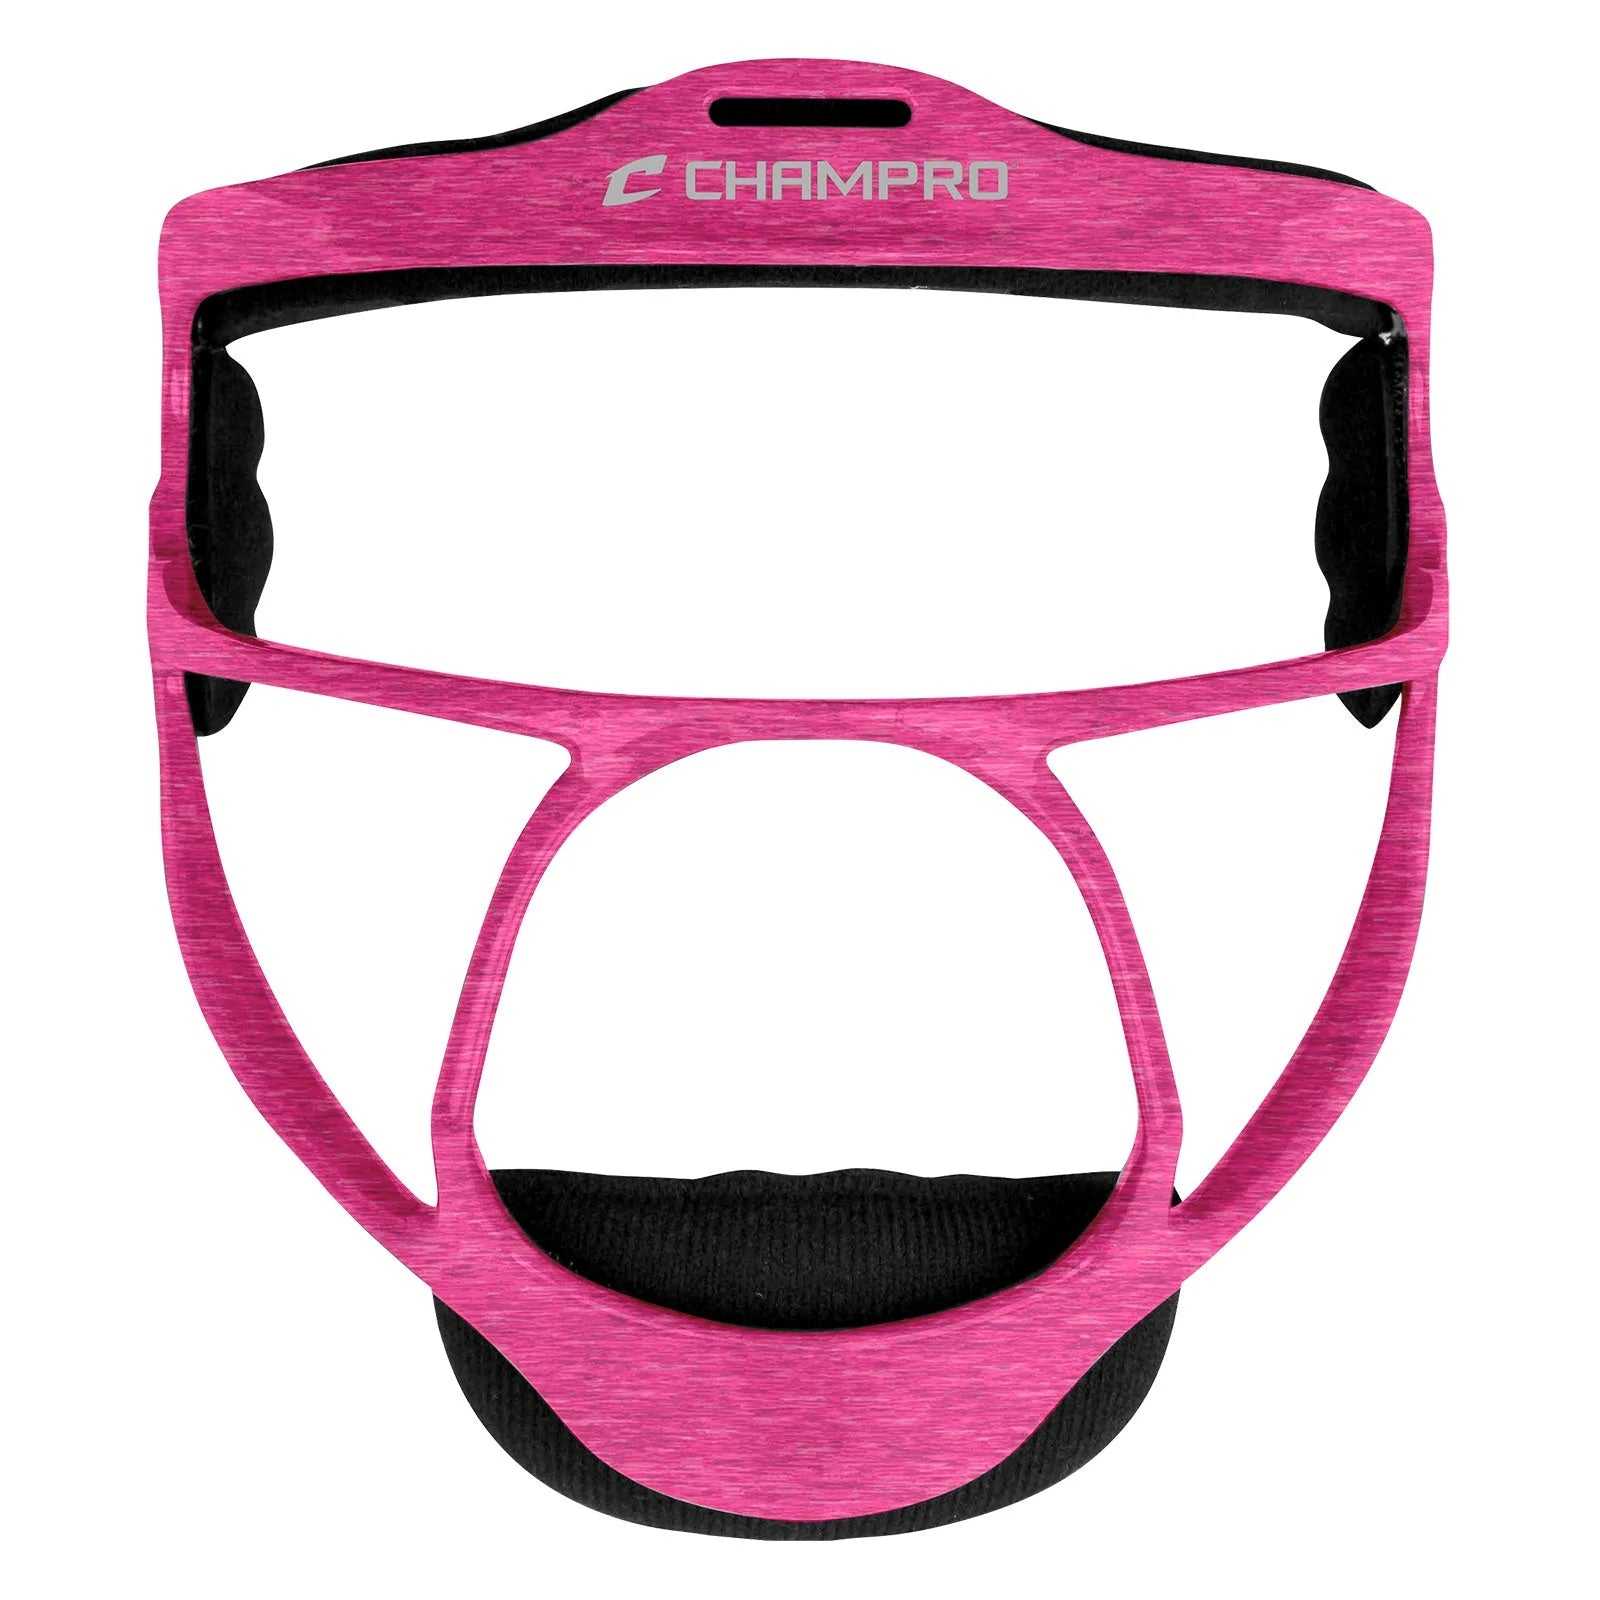 Champro CM01 The Grill Softball Fielder's Protective Covering - Heather Hot Pink - HIT a Double - 1